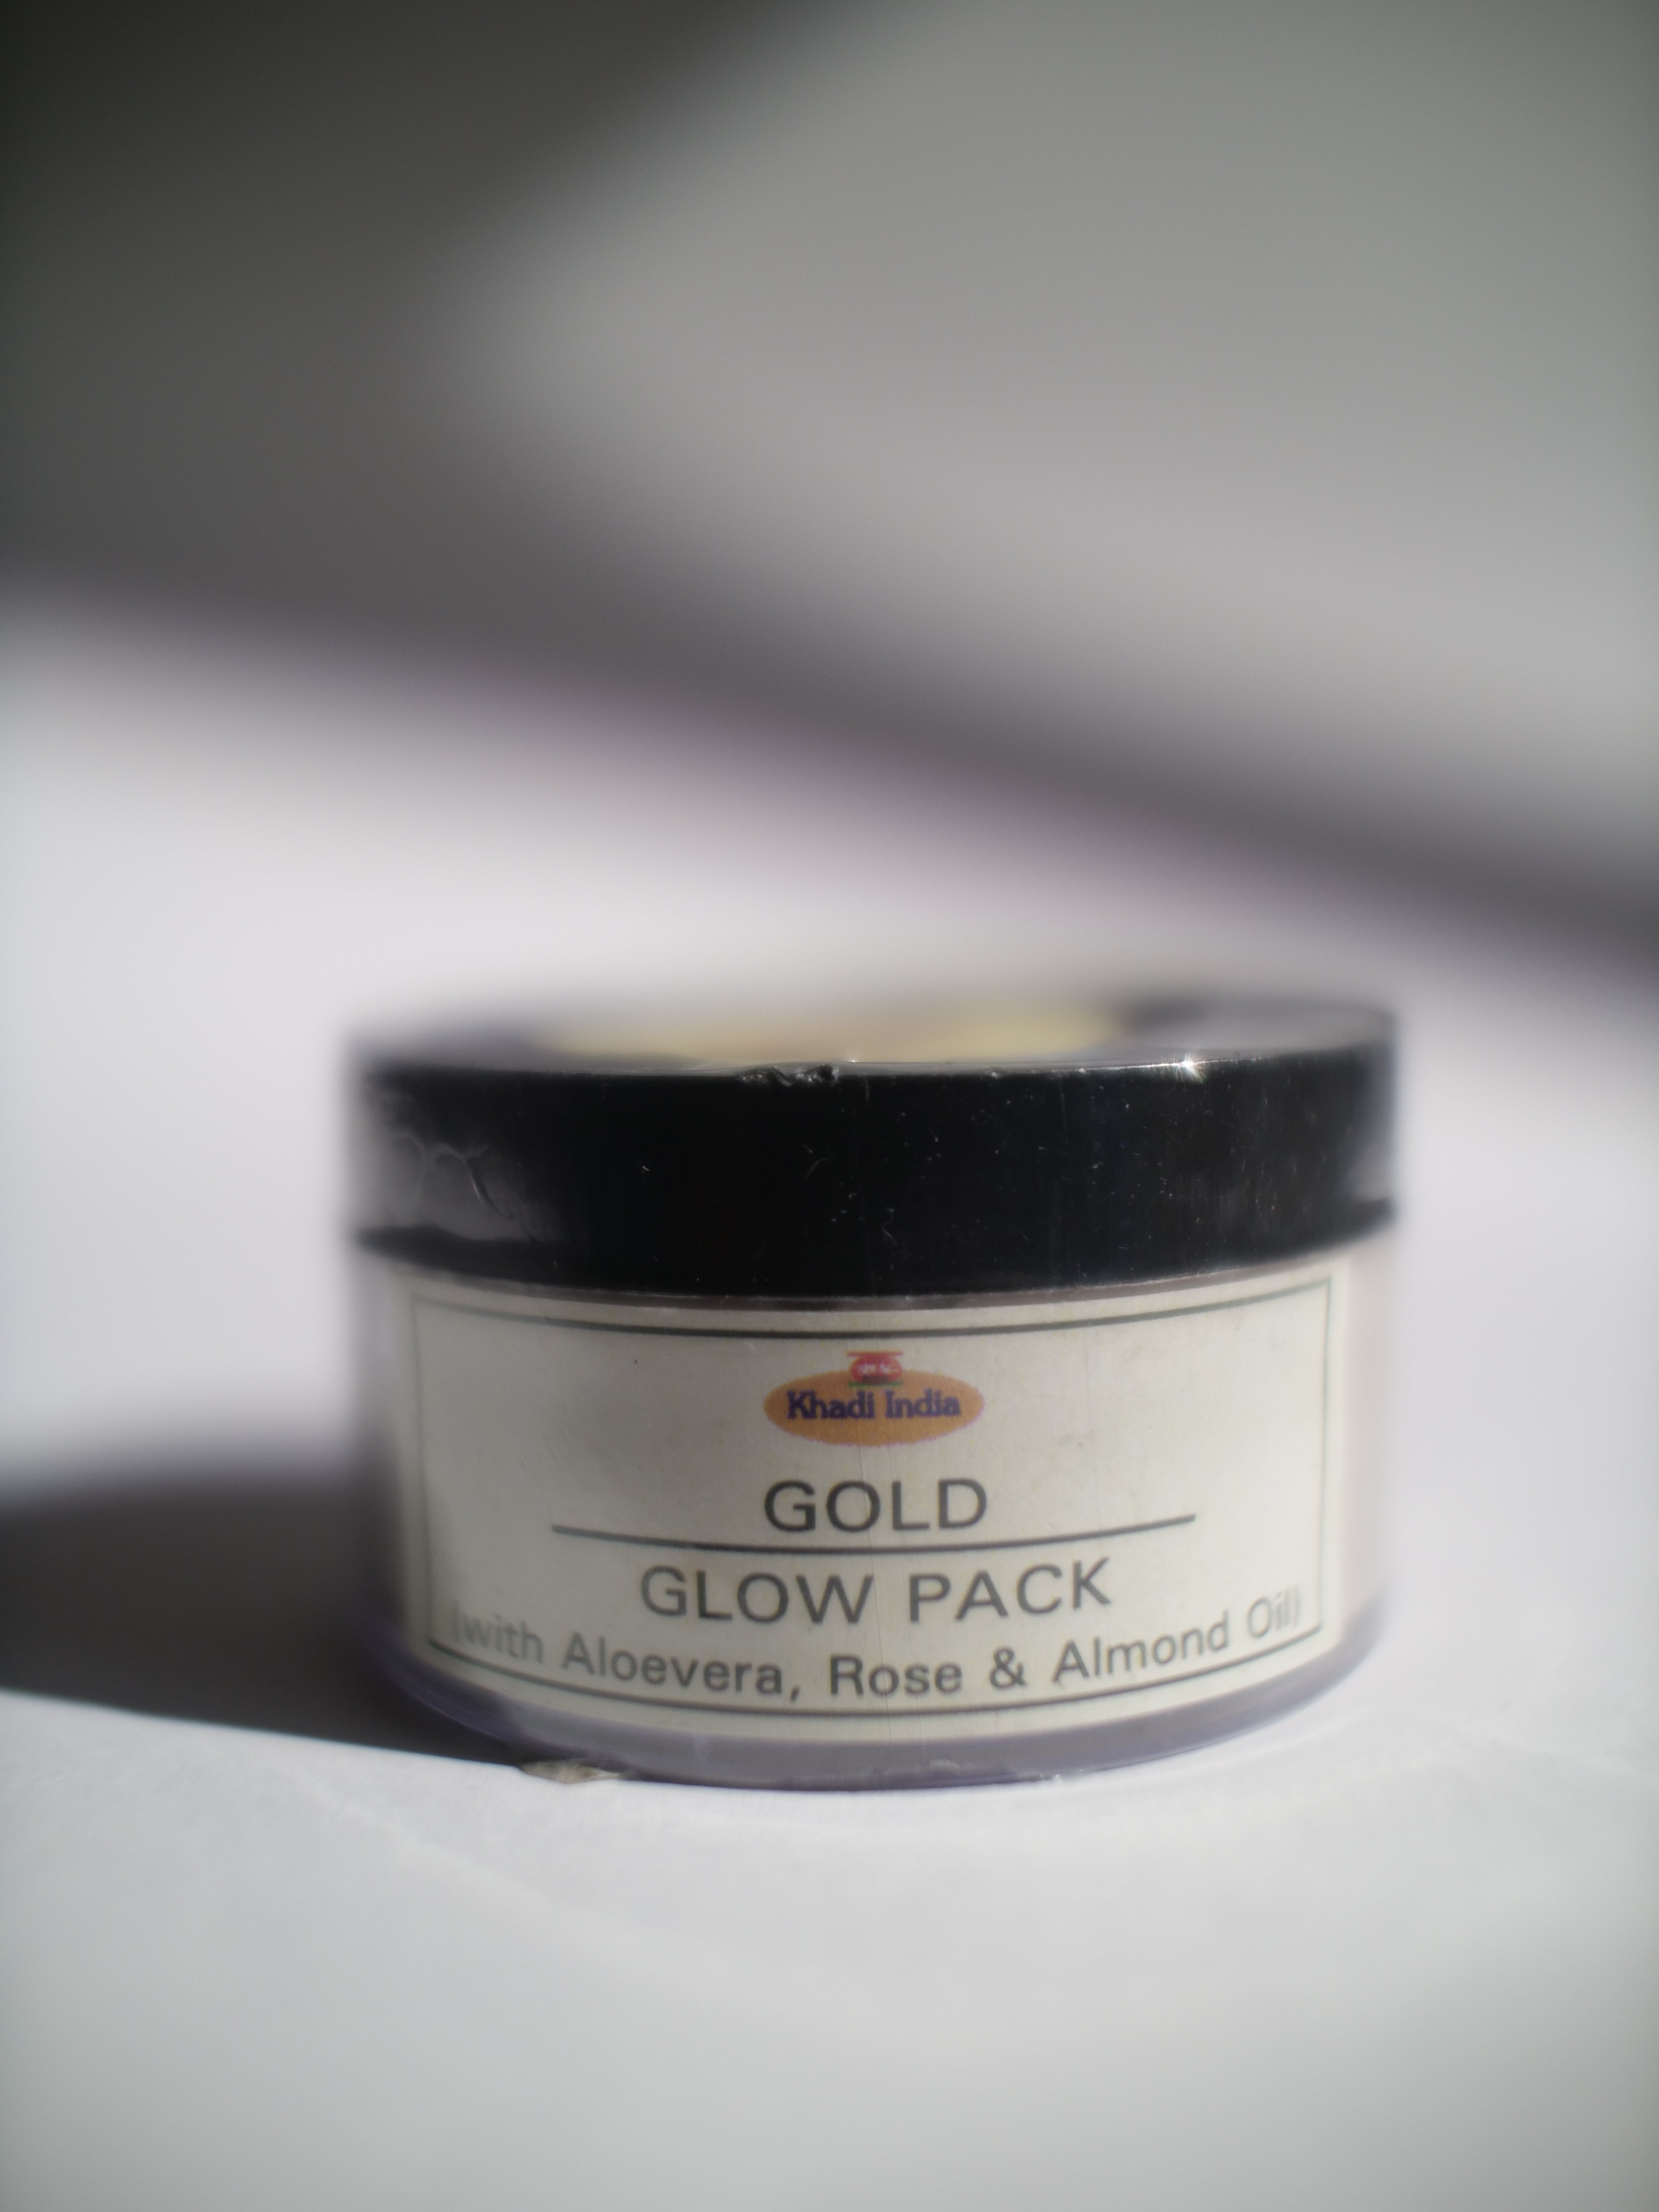 GOLD GLOW PACK（ペースト）限定1個【with ALOEVERA ROSE ALMOND OIL | 60g】